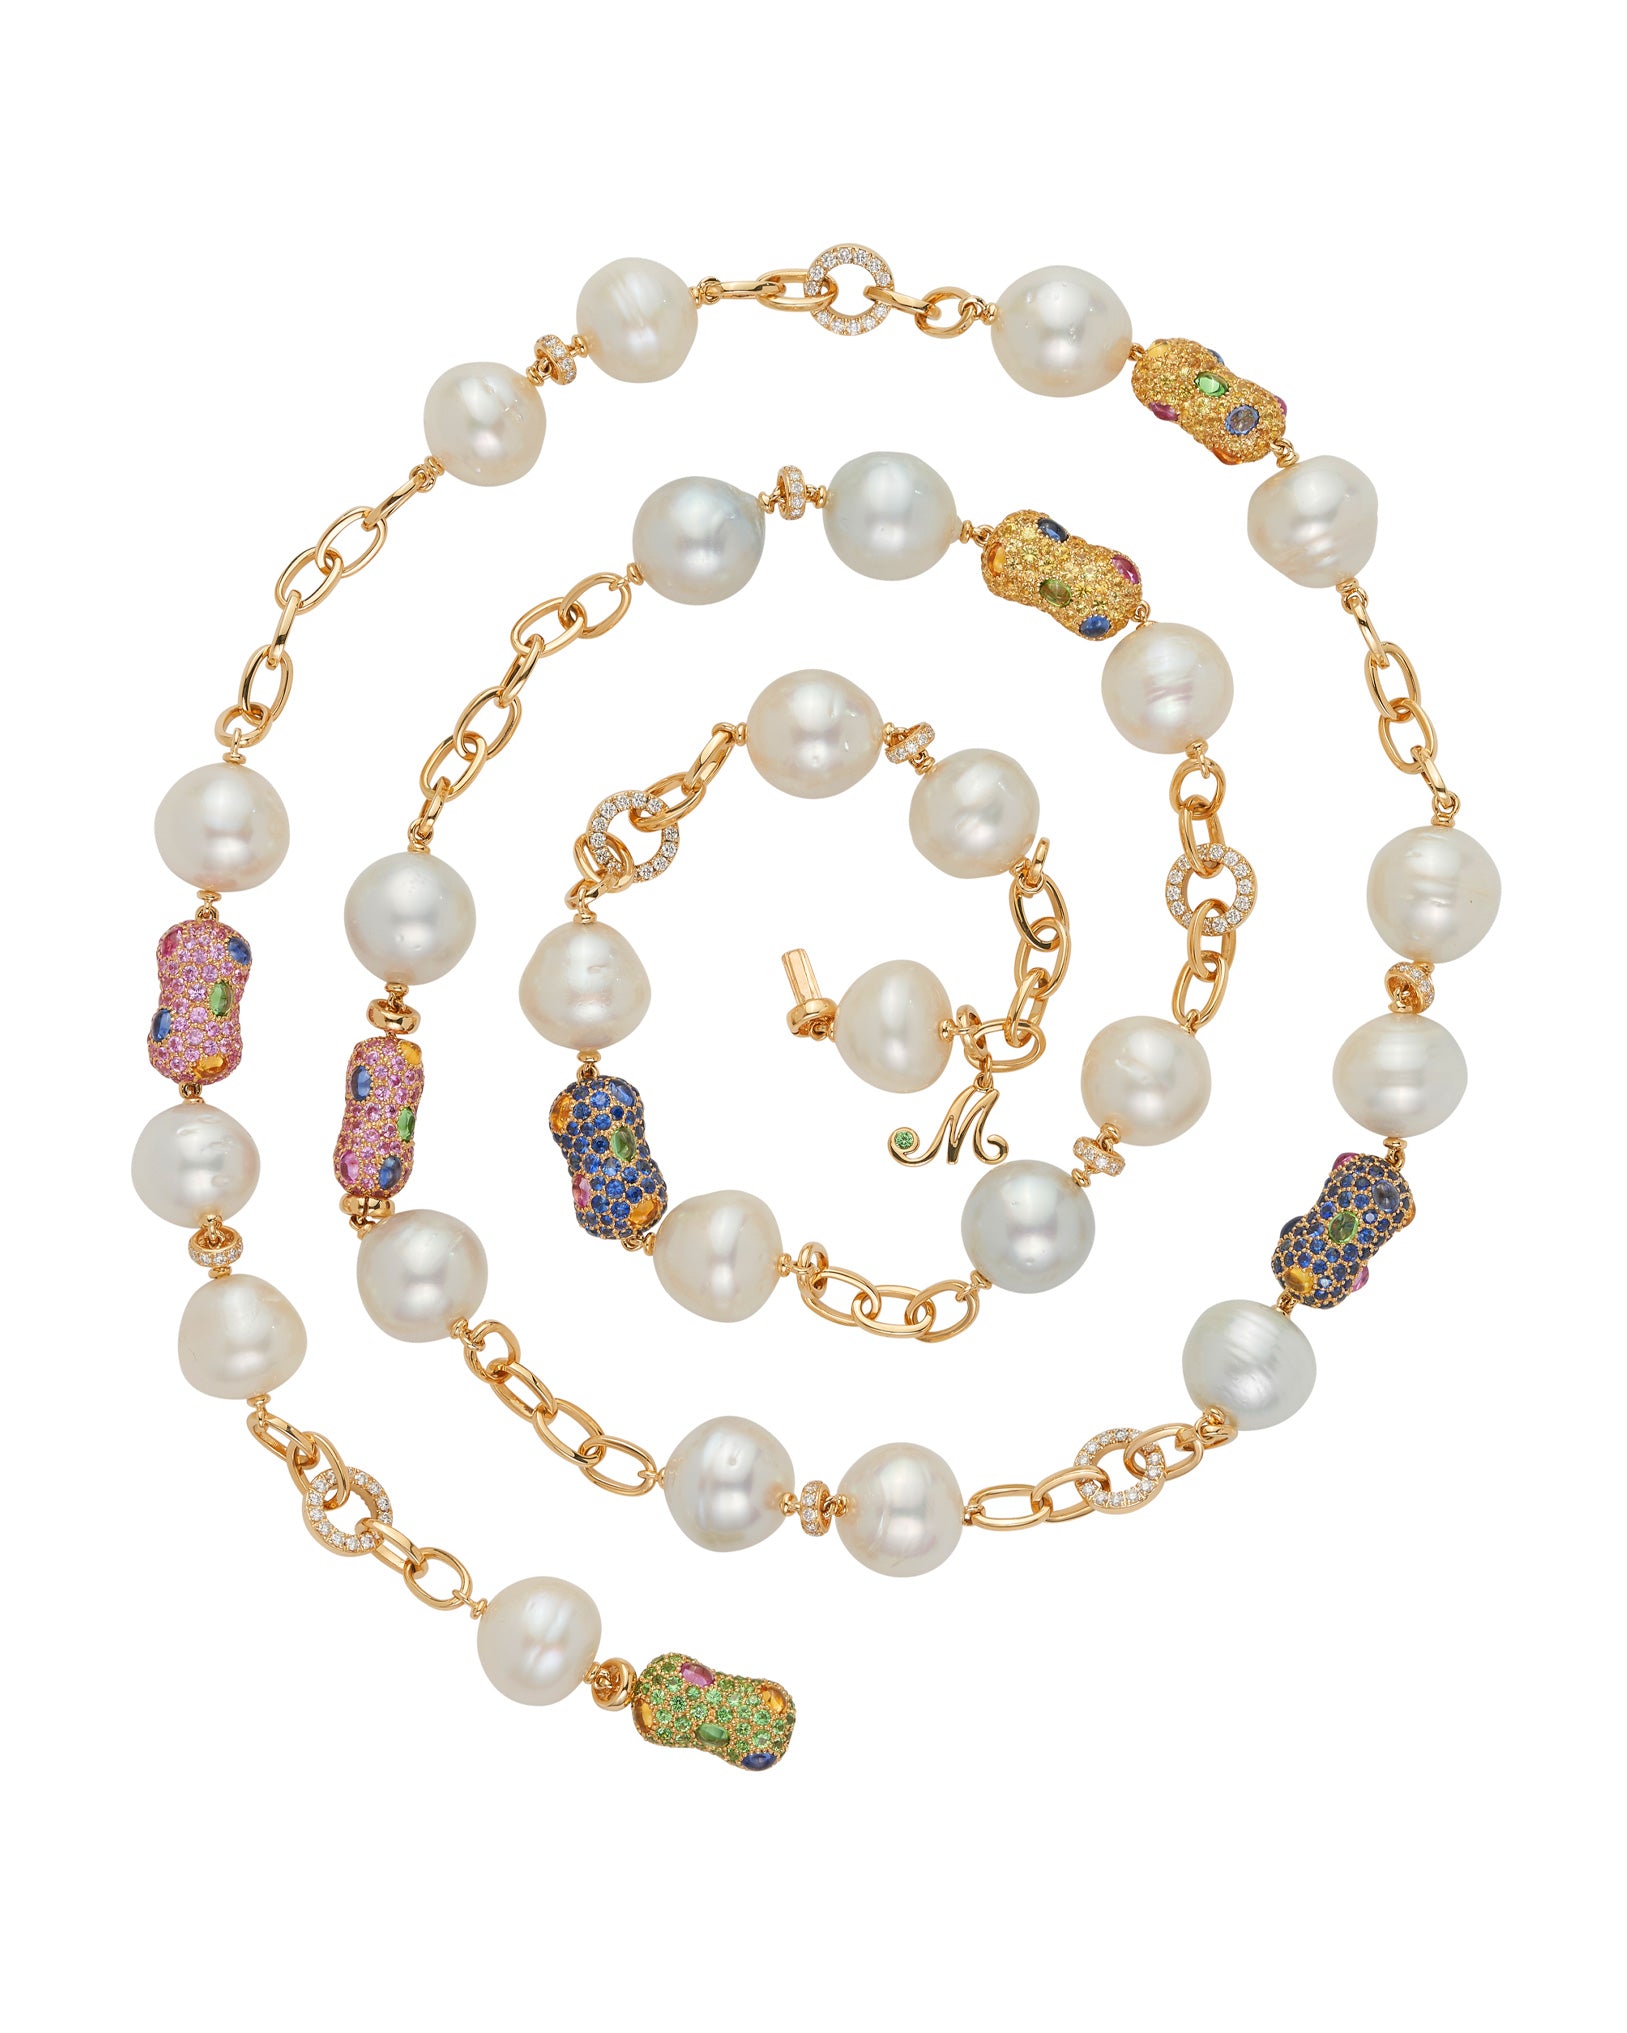 Tribal Chic Pearl Necklace